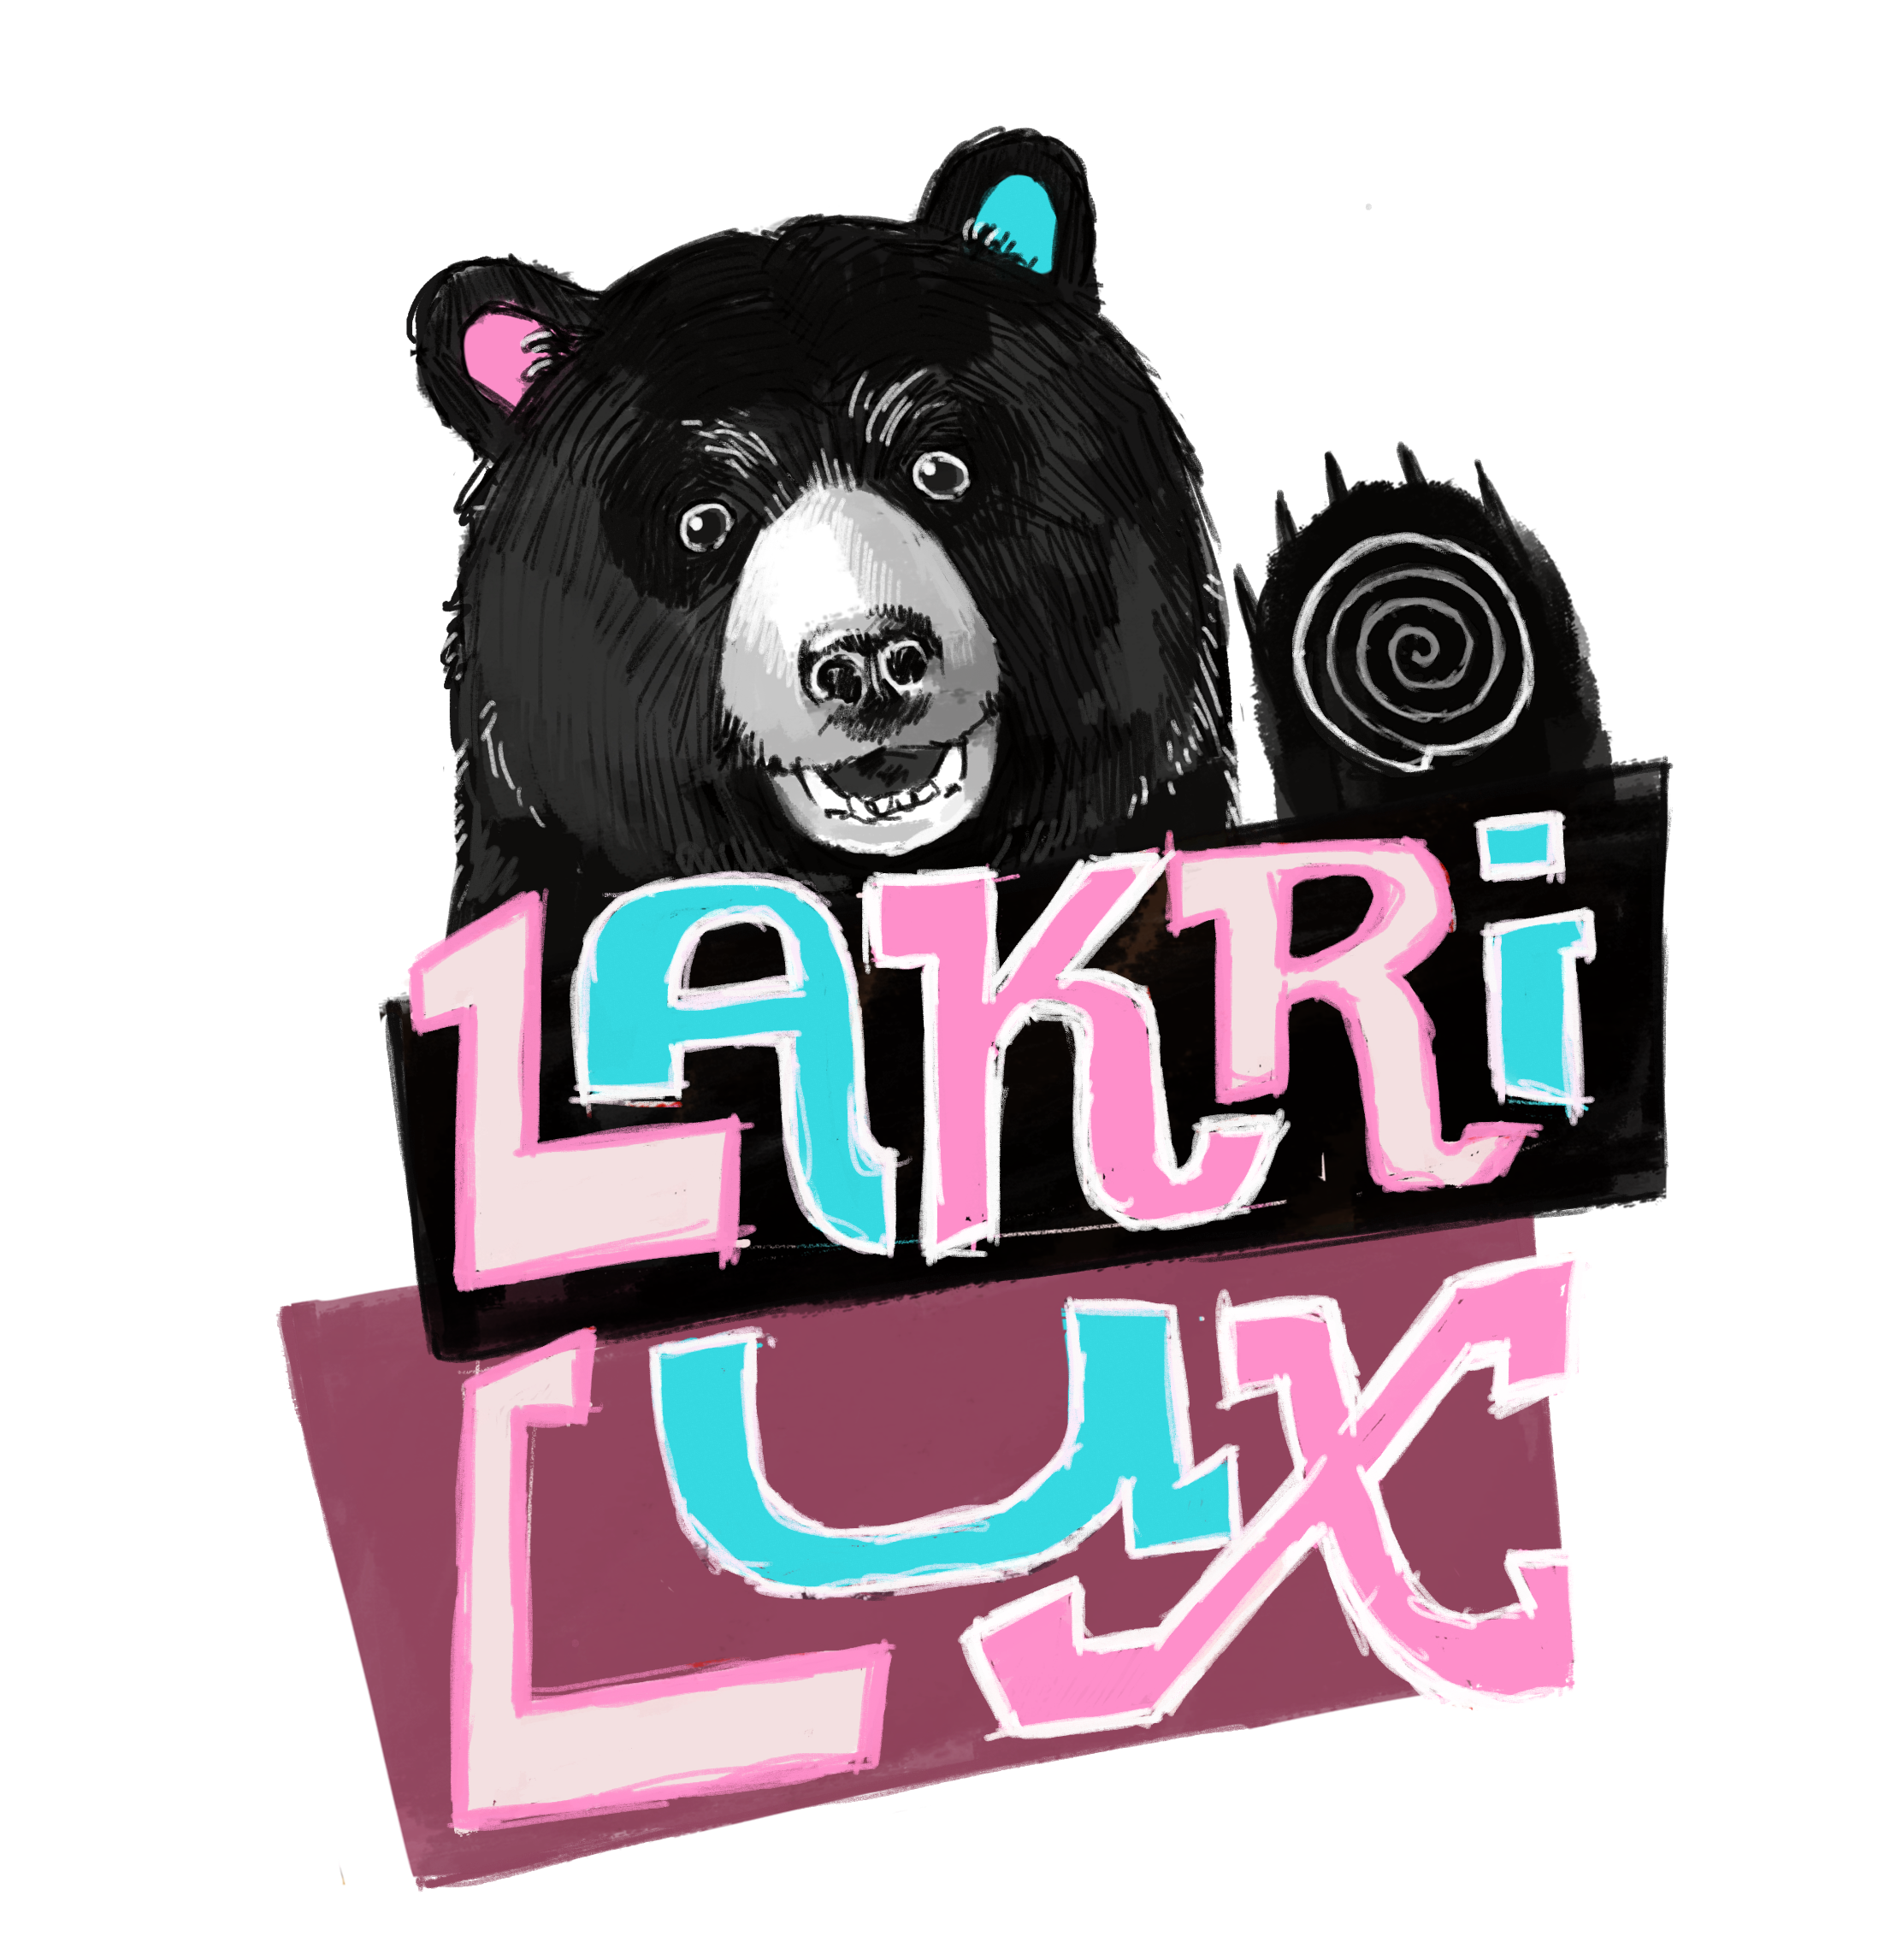 Logo of Lakri-Lux with a black bear waving. A licorice sweet swirl forms the center of his paw.